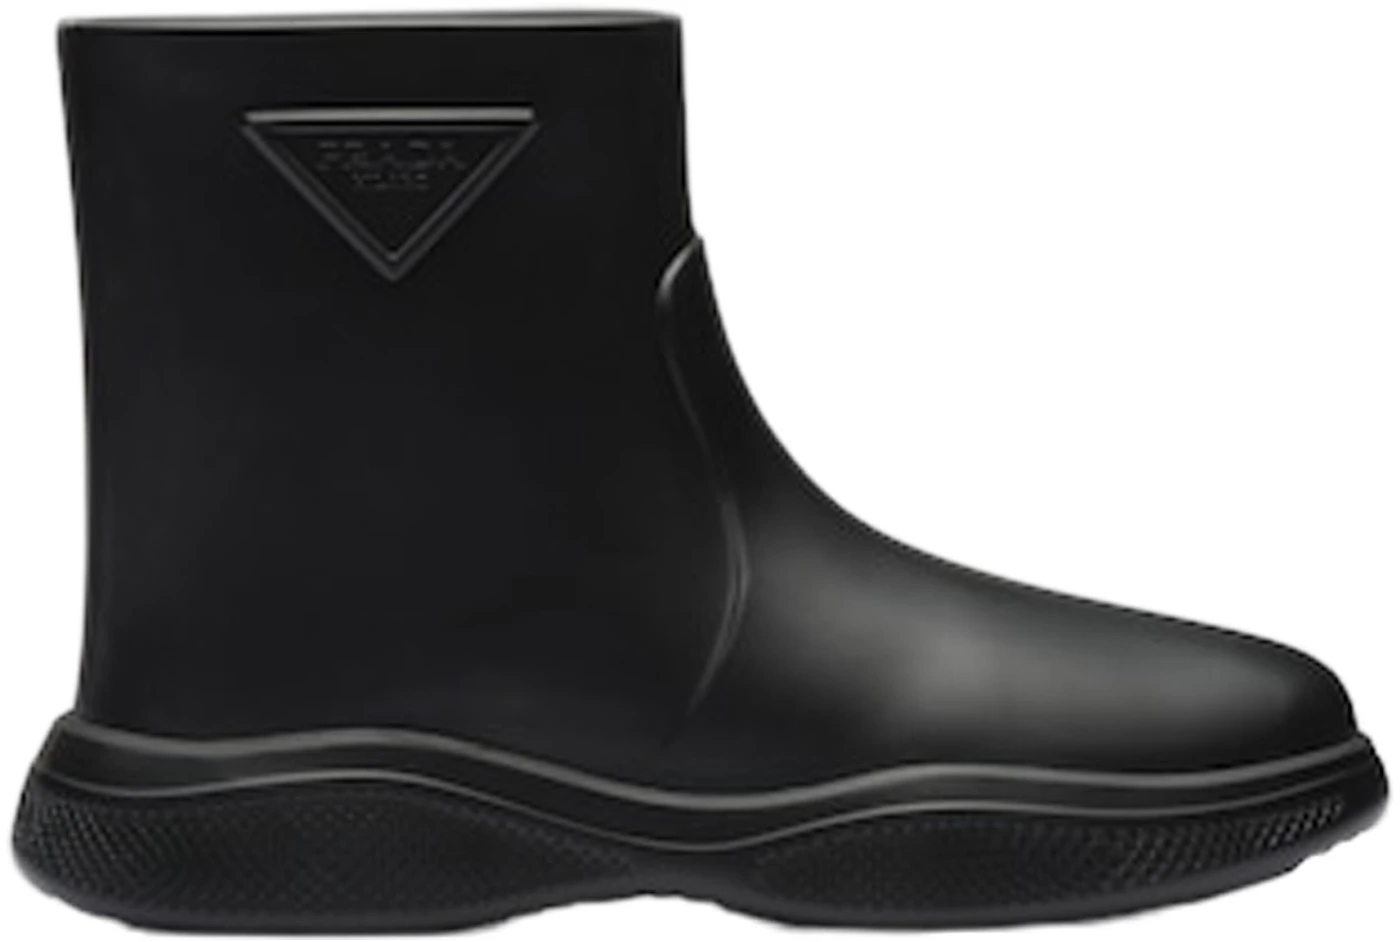 Leather Nylon And Rubber Boots in Black - Prada